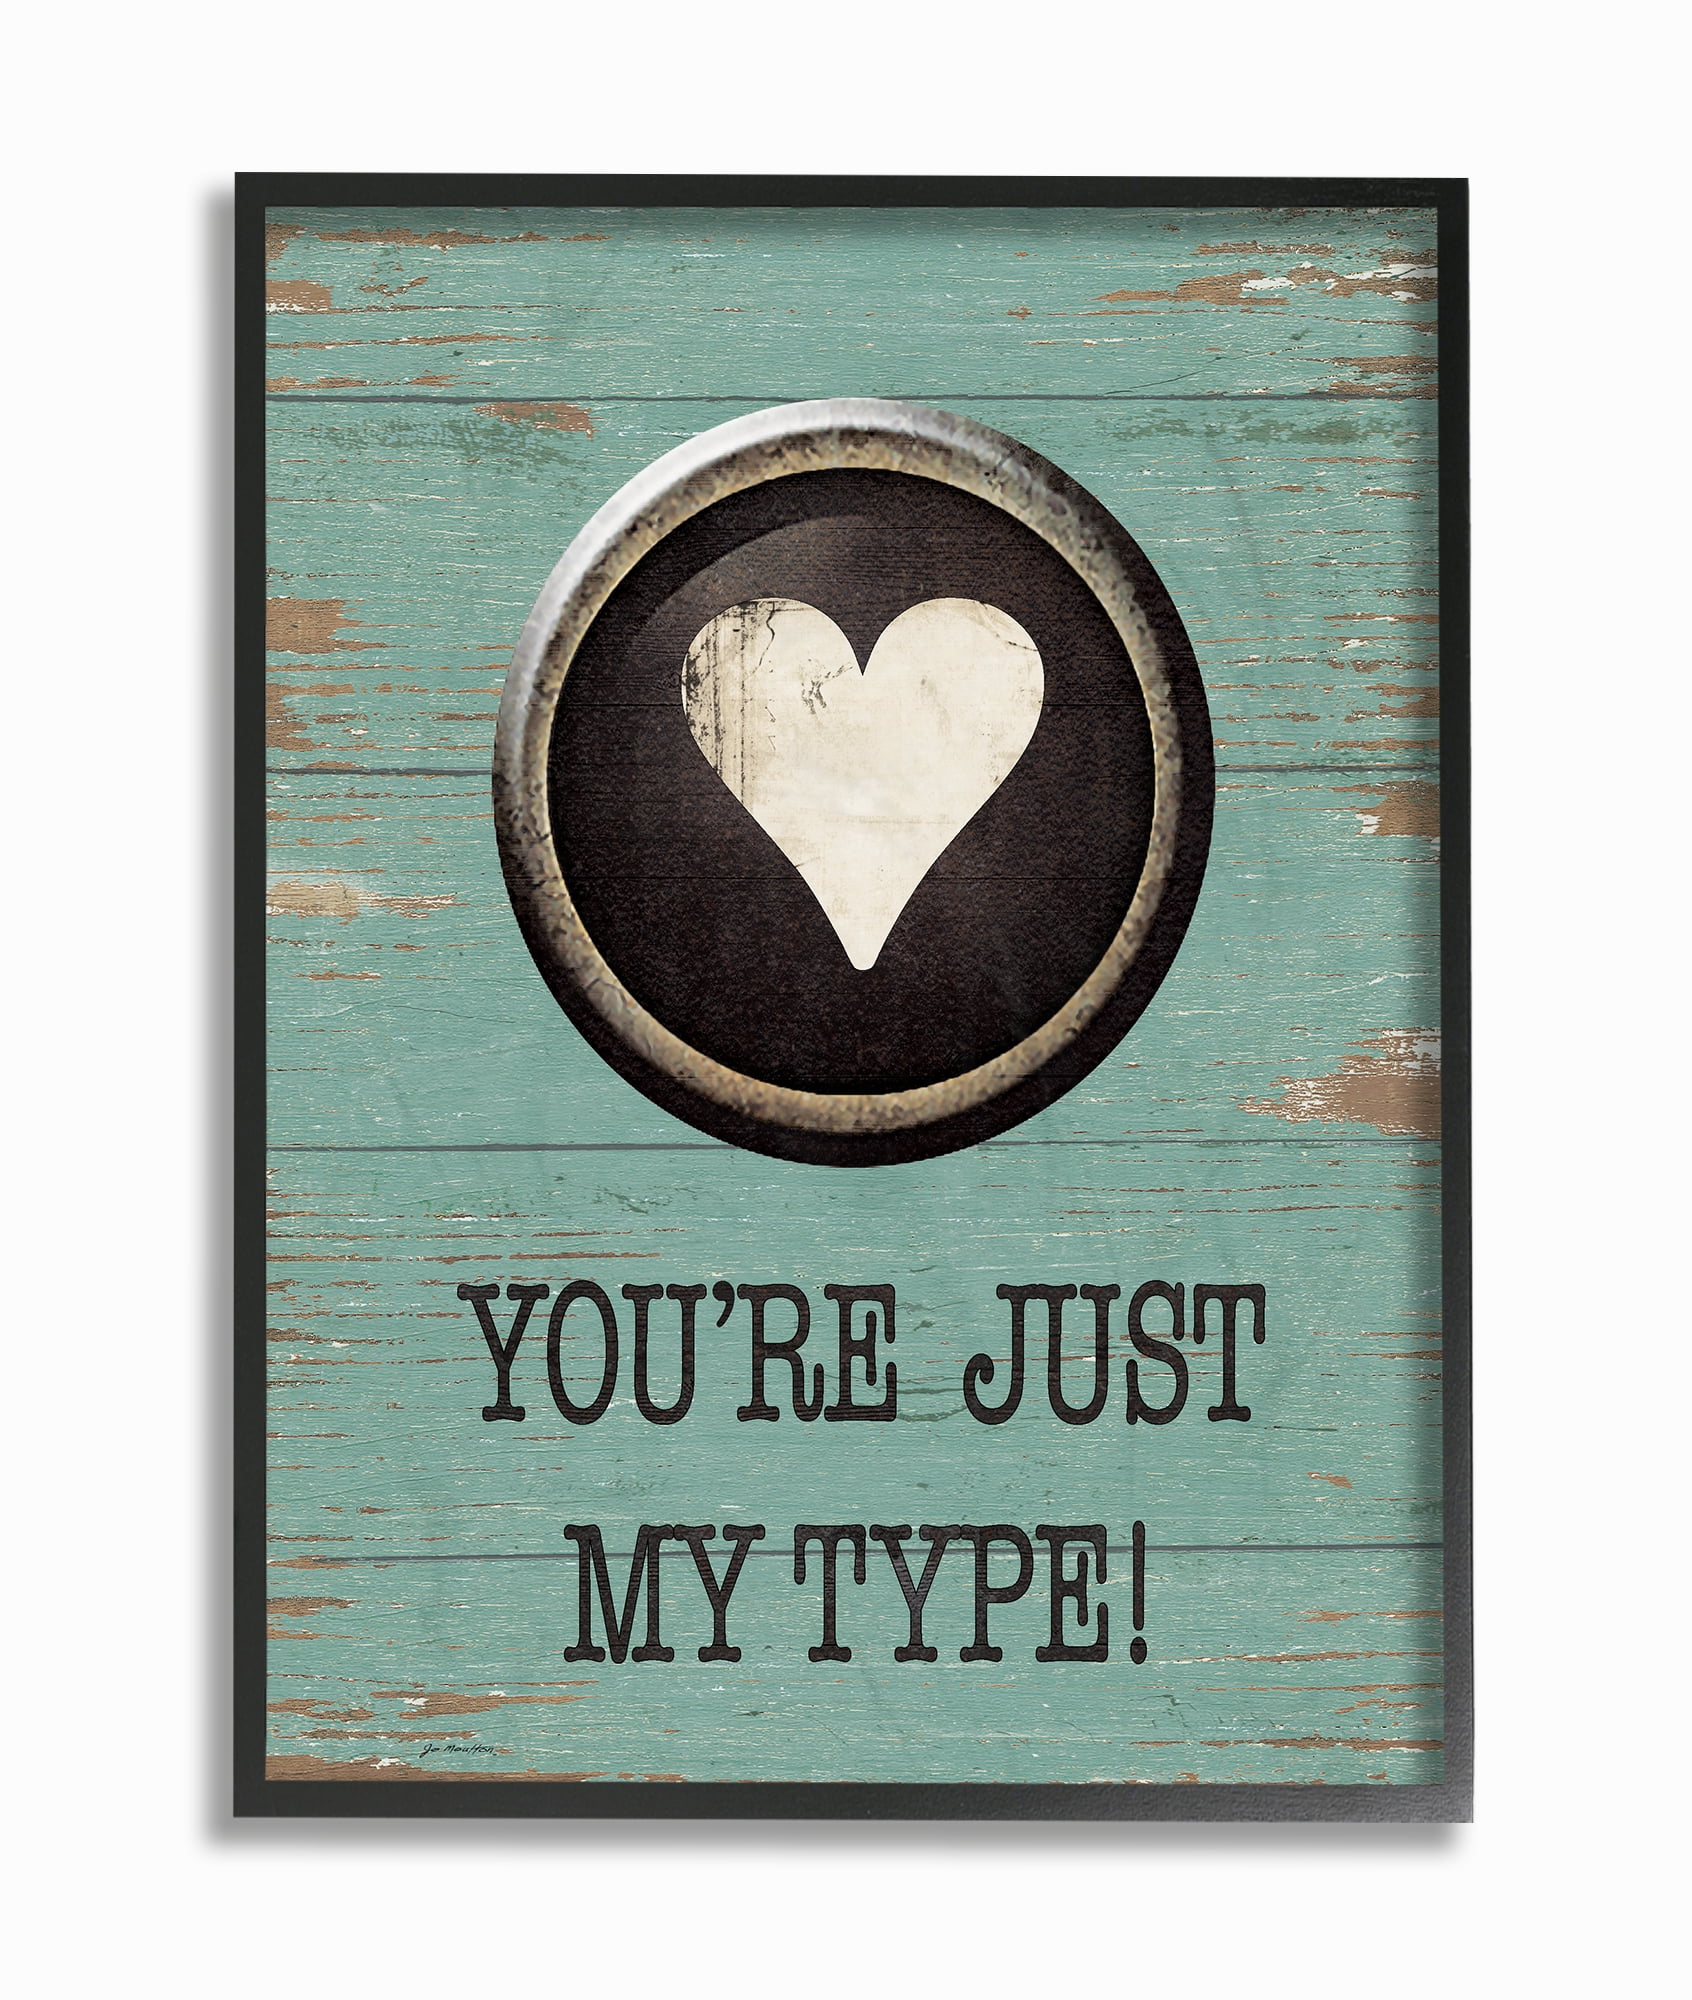 The Stupell Home Decor Collection You You Hold The Key to My Heart Framed Giclee Texturized Art Multi-Color 12 x 12 